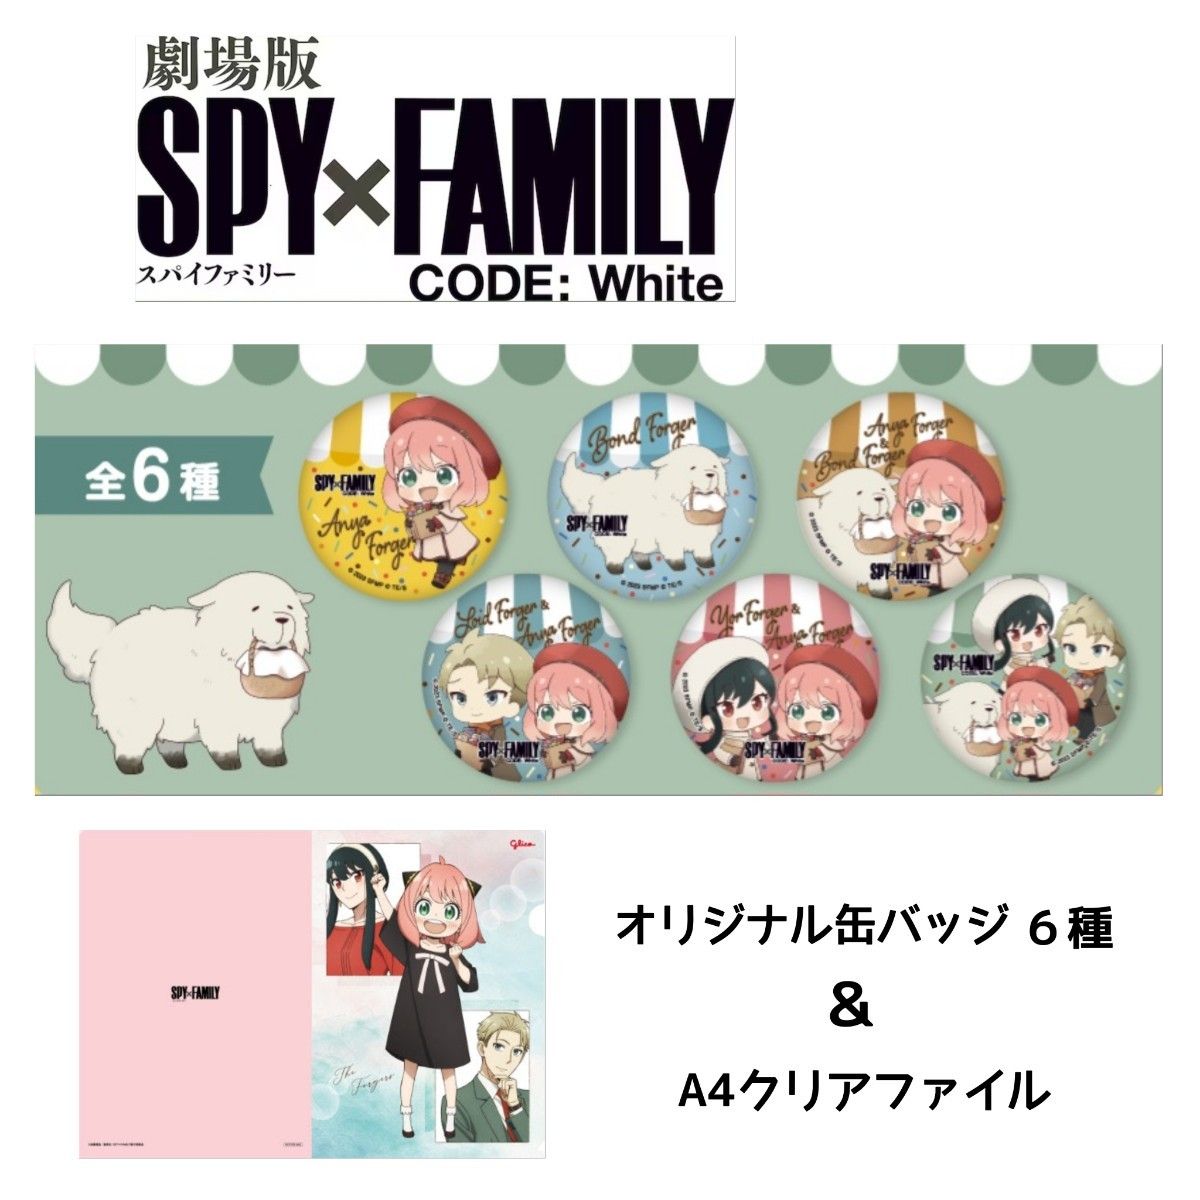 SPY×FAMILY 缶バッジ＆クリアファイル